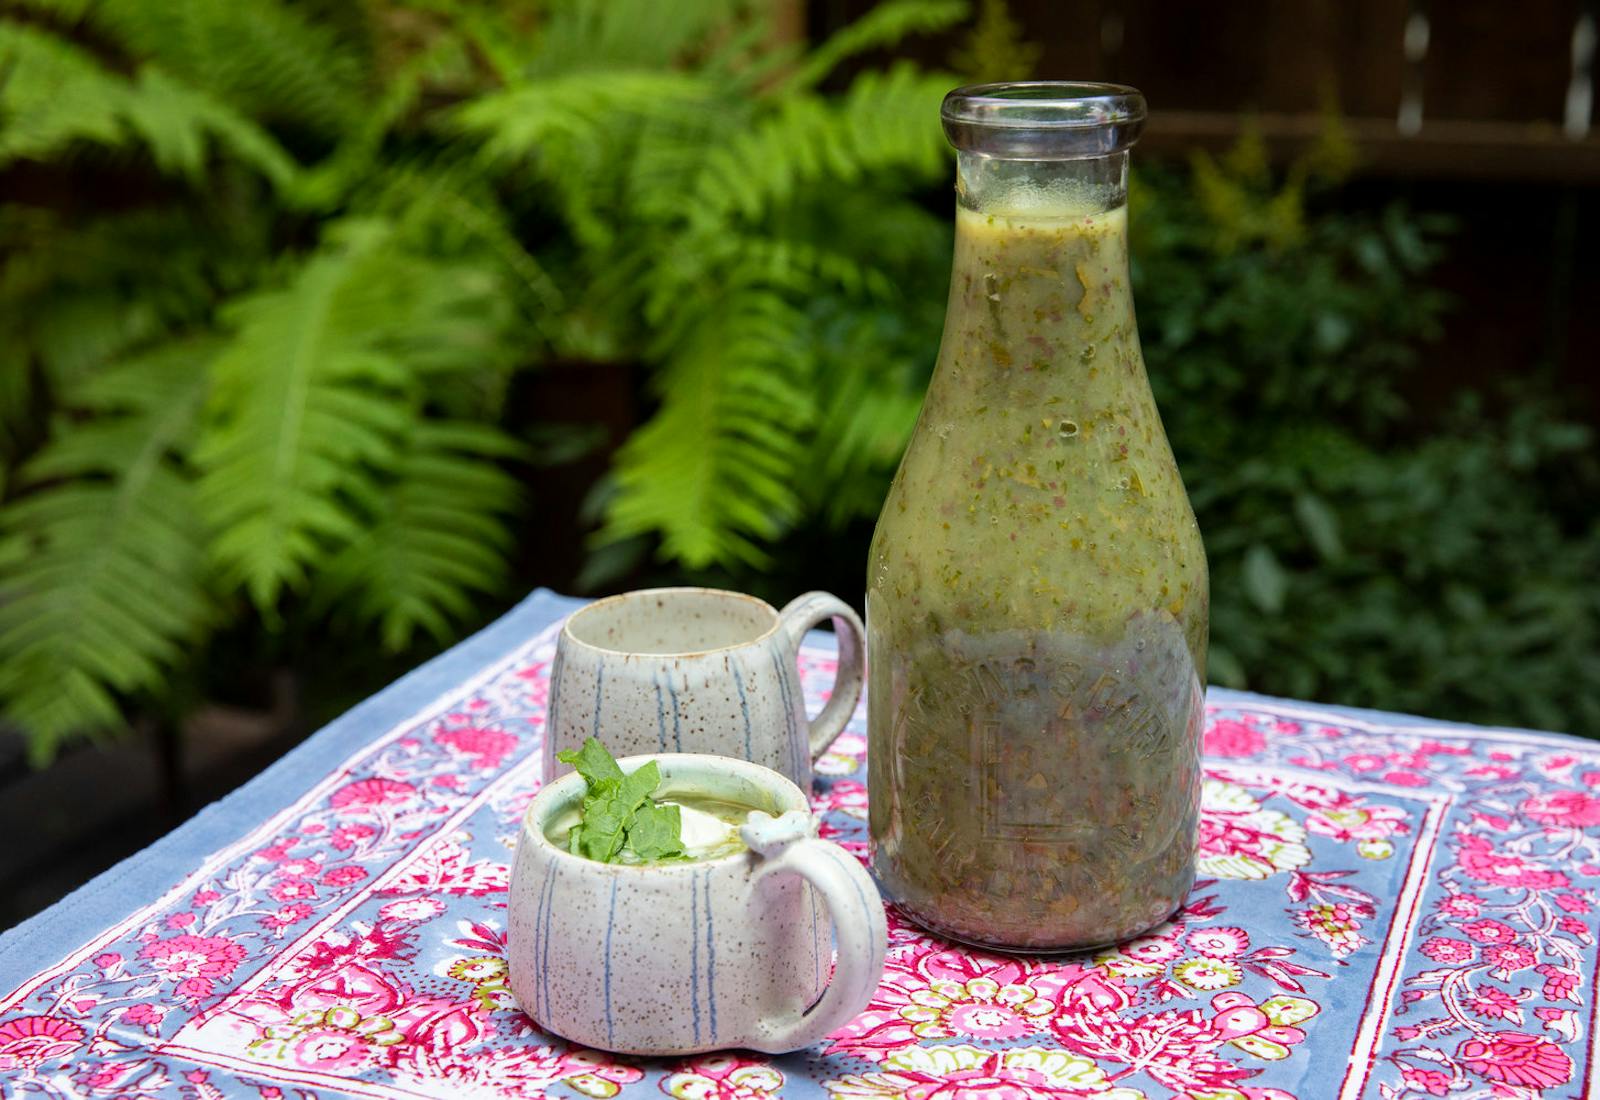 Glass bottle with schav alongside mugs of schav with sour cream and fresh sorrel atop printed tablecloth, outdoors.